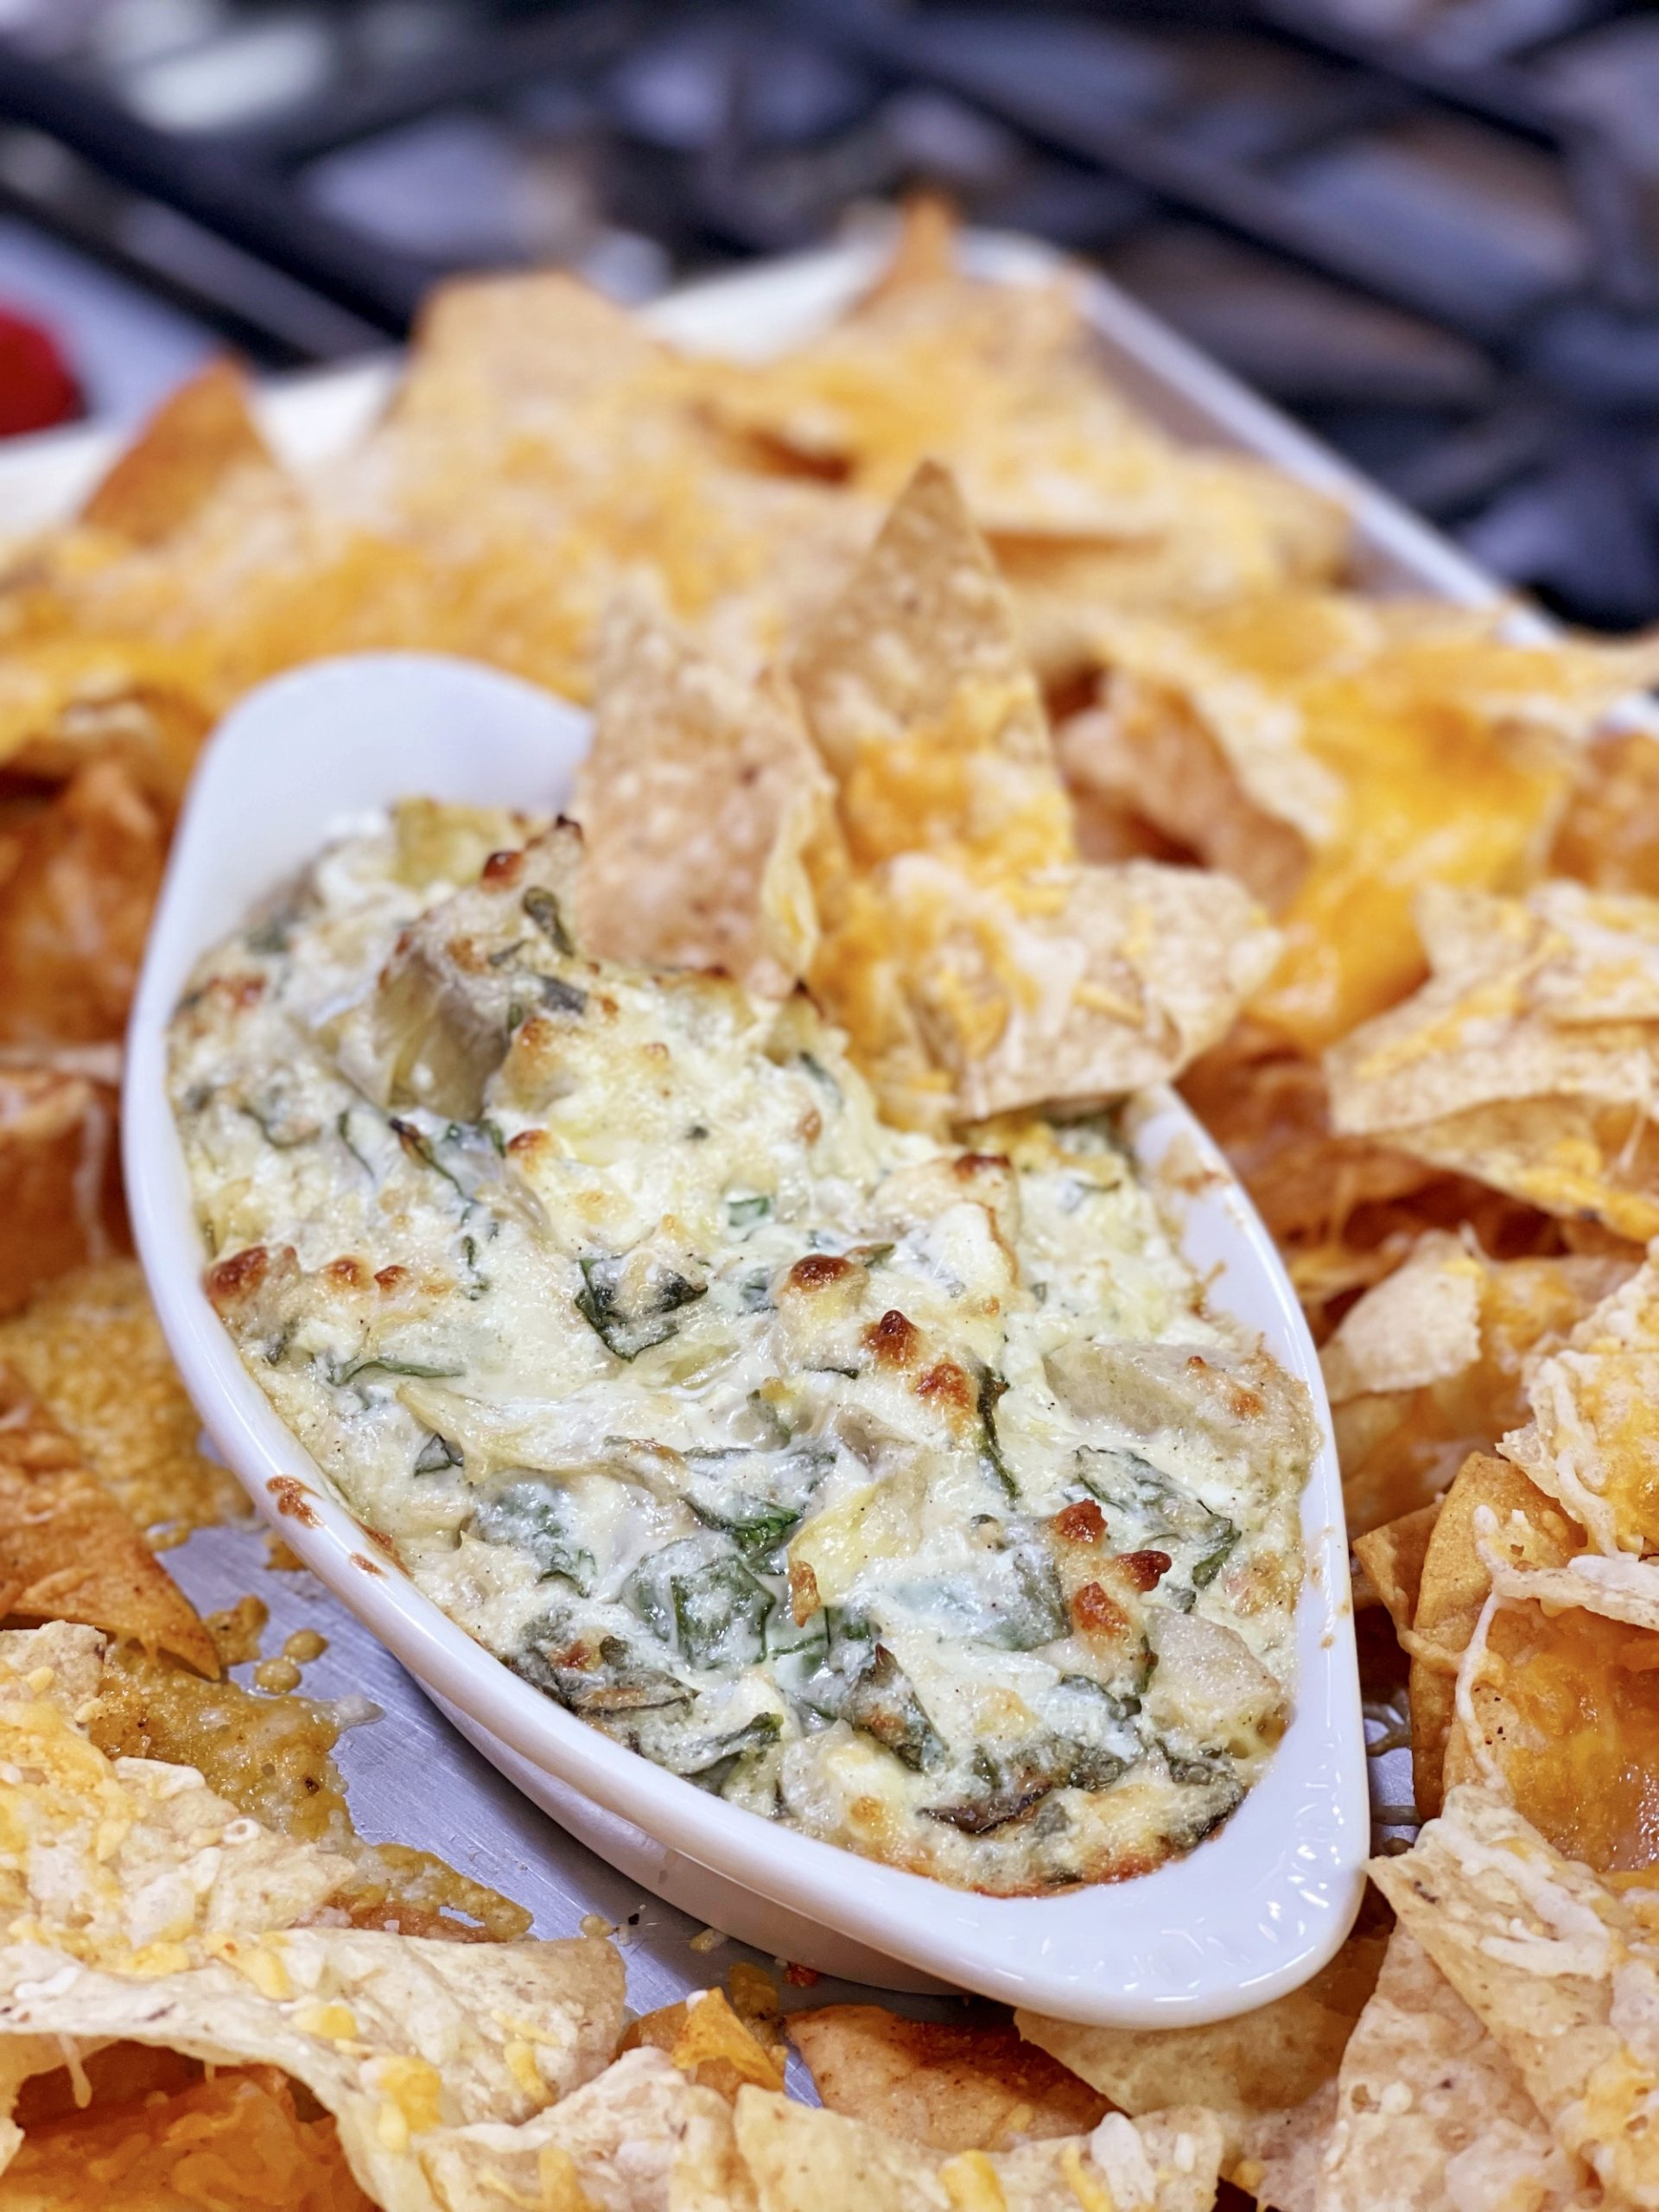 Homemade Spinach Artichoke Dip - cooking with chef bryan